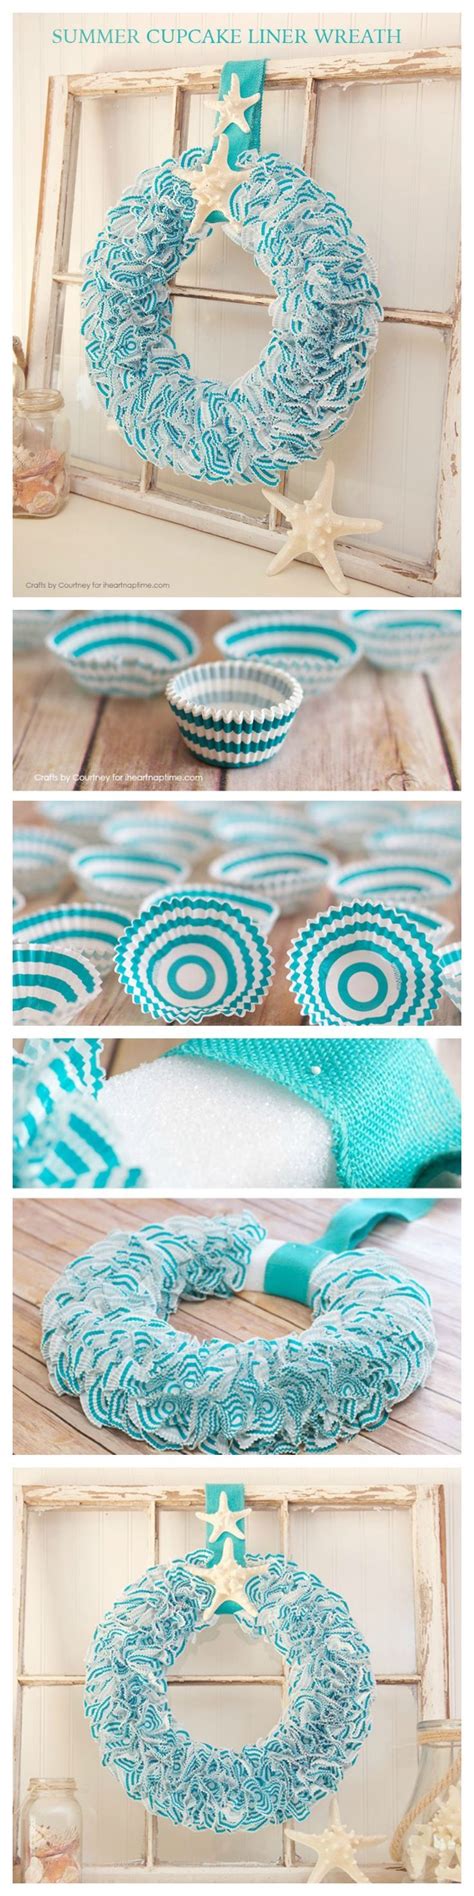 Today i am going to show you how to make your own super cute cupcake liners! DIY Wreath using Cupcake Liners | Diy wreath, Wreaths, Wreath crafts